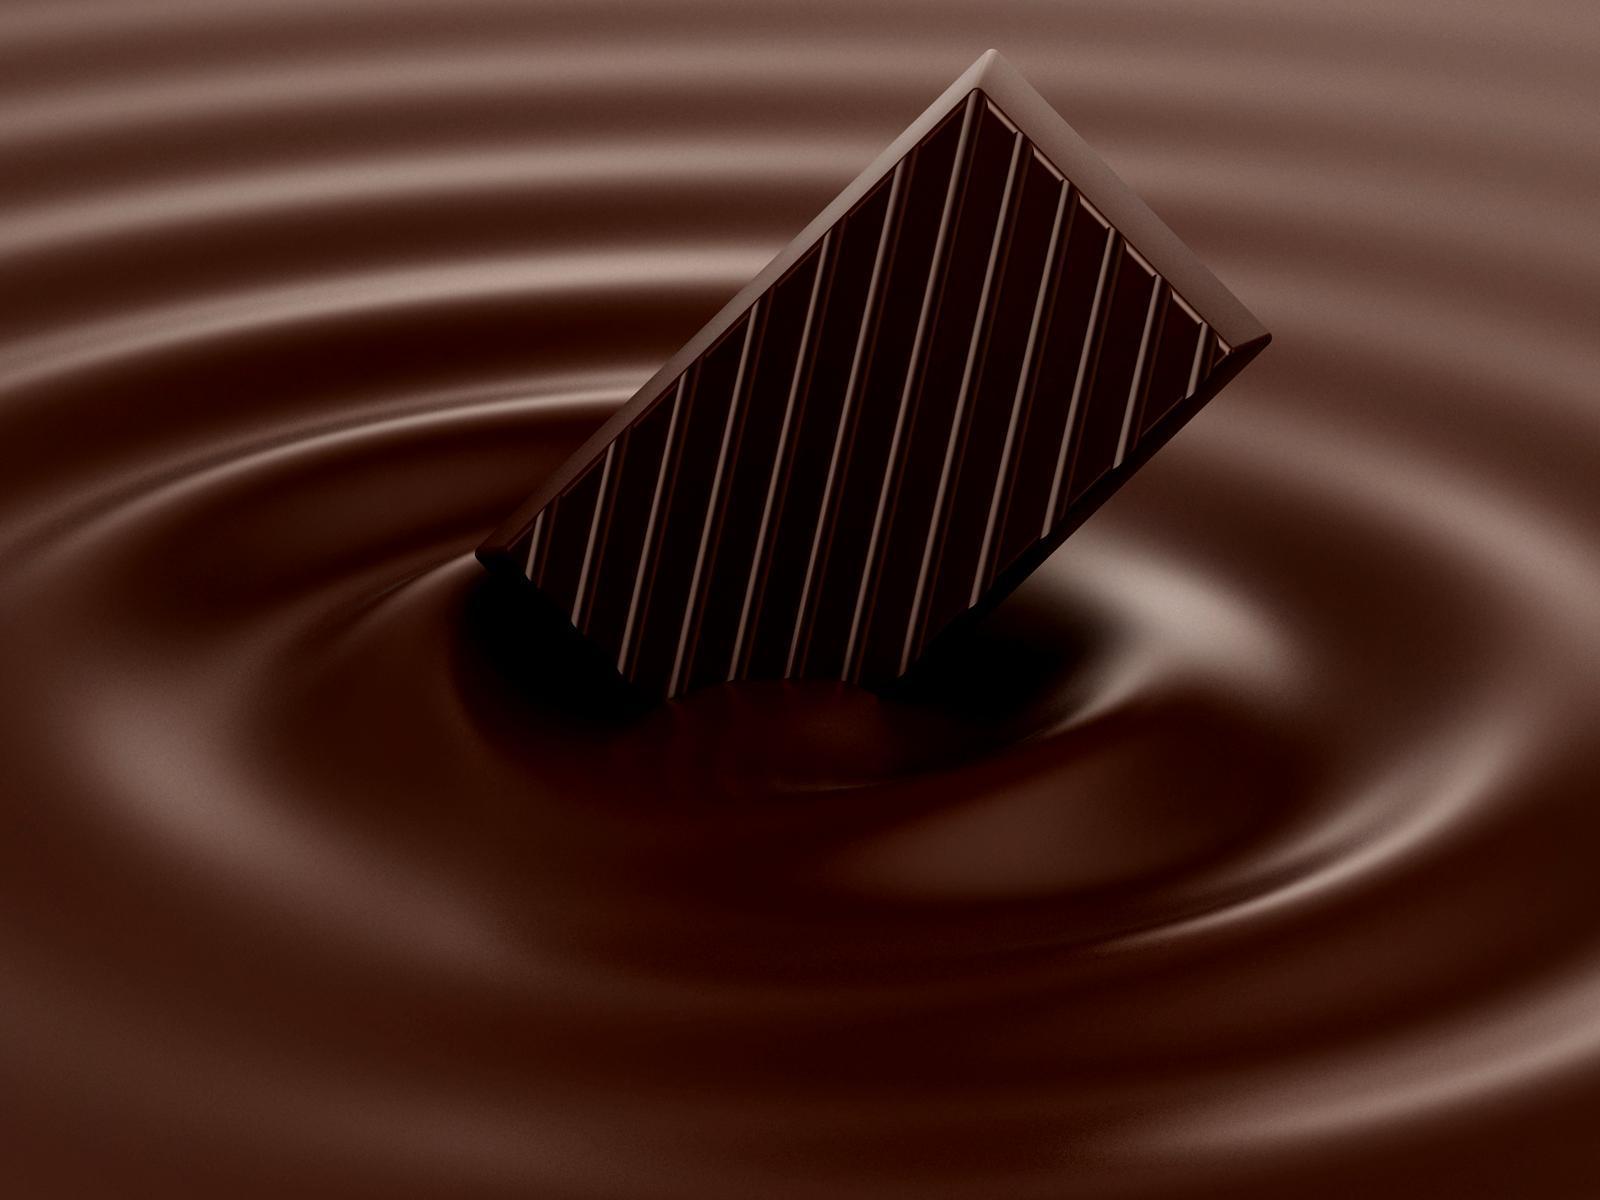 Another Chocolate wallpaper